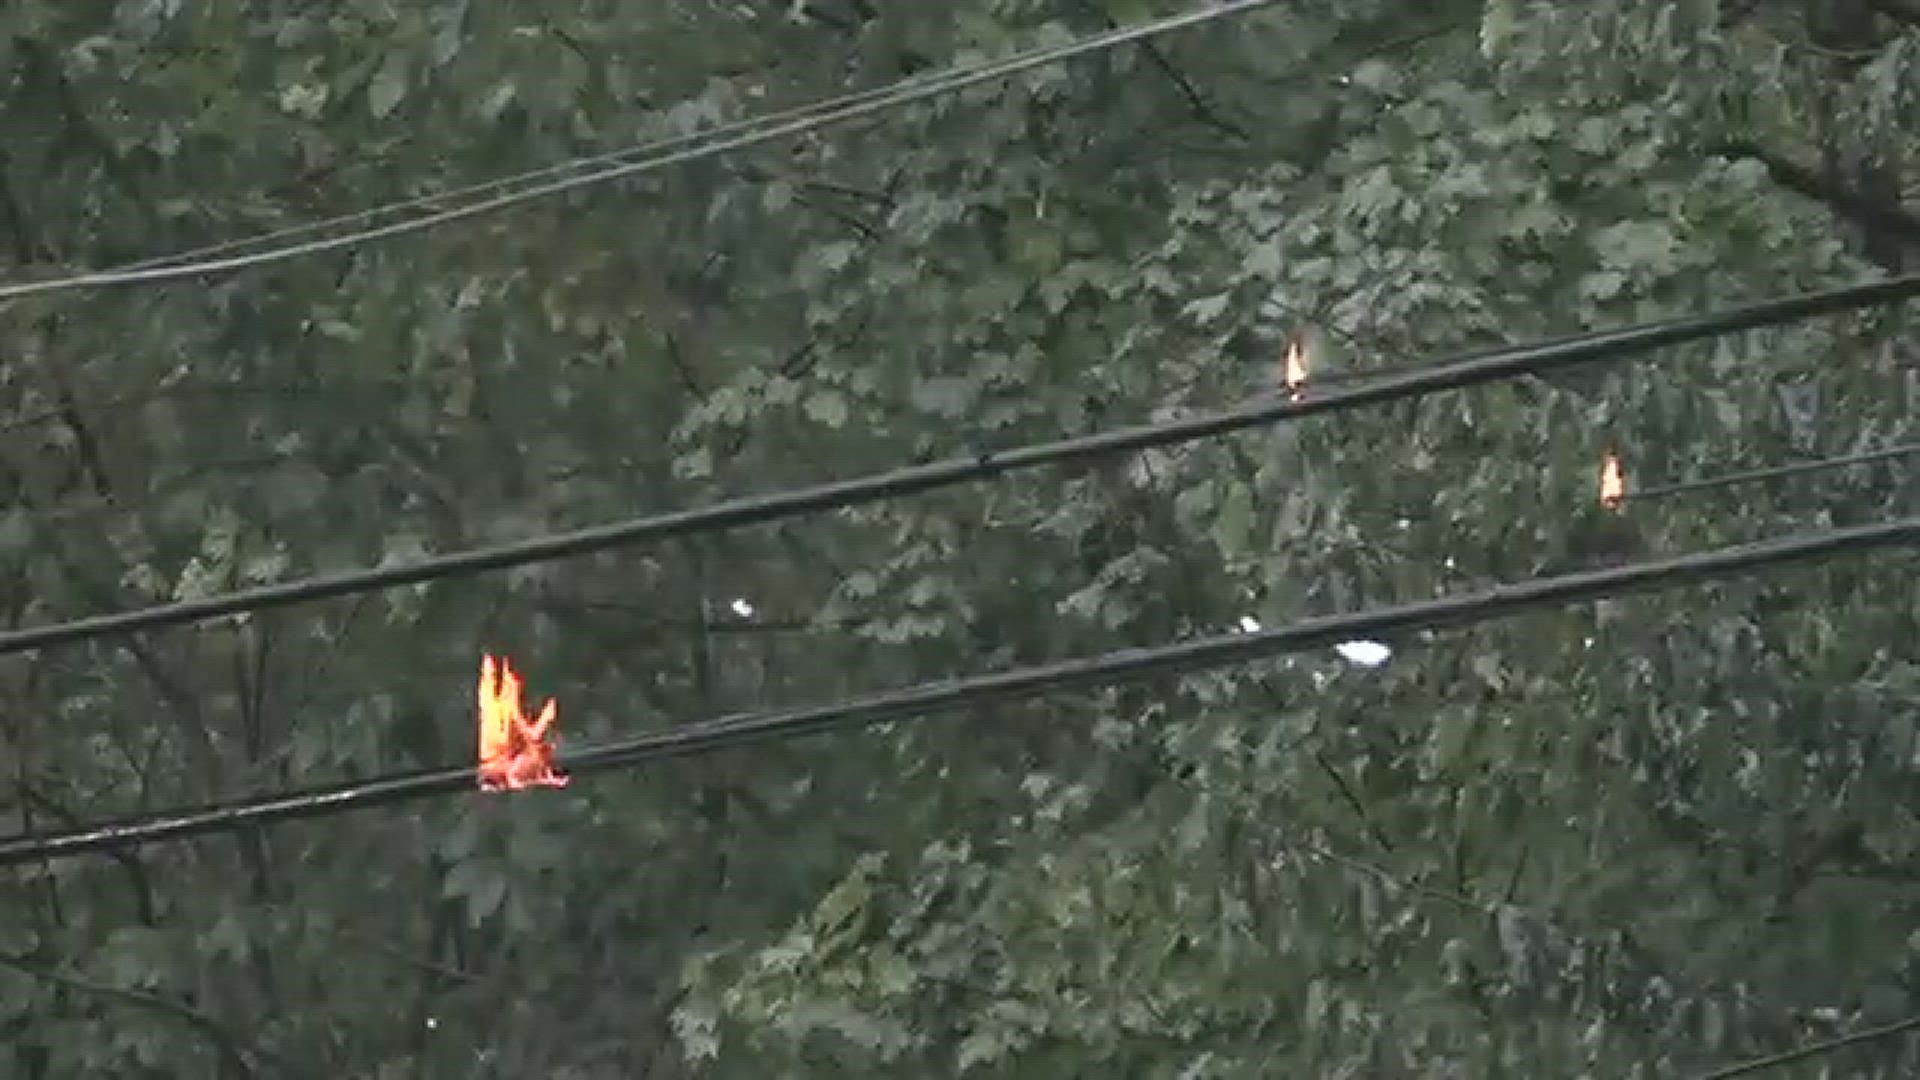 A power line keeps catching on fire in Randleman. Authorities in the area said it keeps reigniting and they're working to get electrical crews out there to fix it.